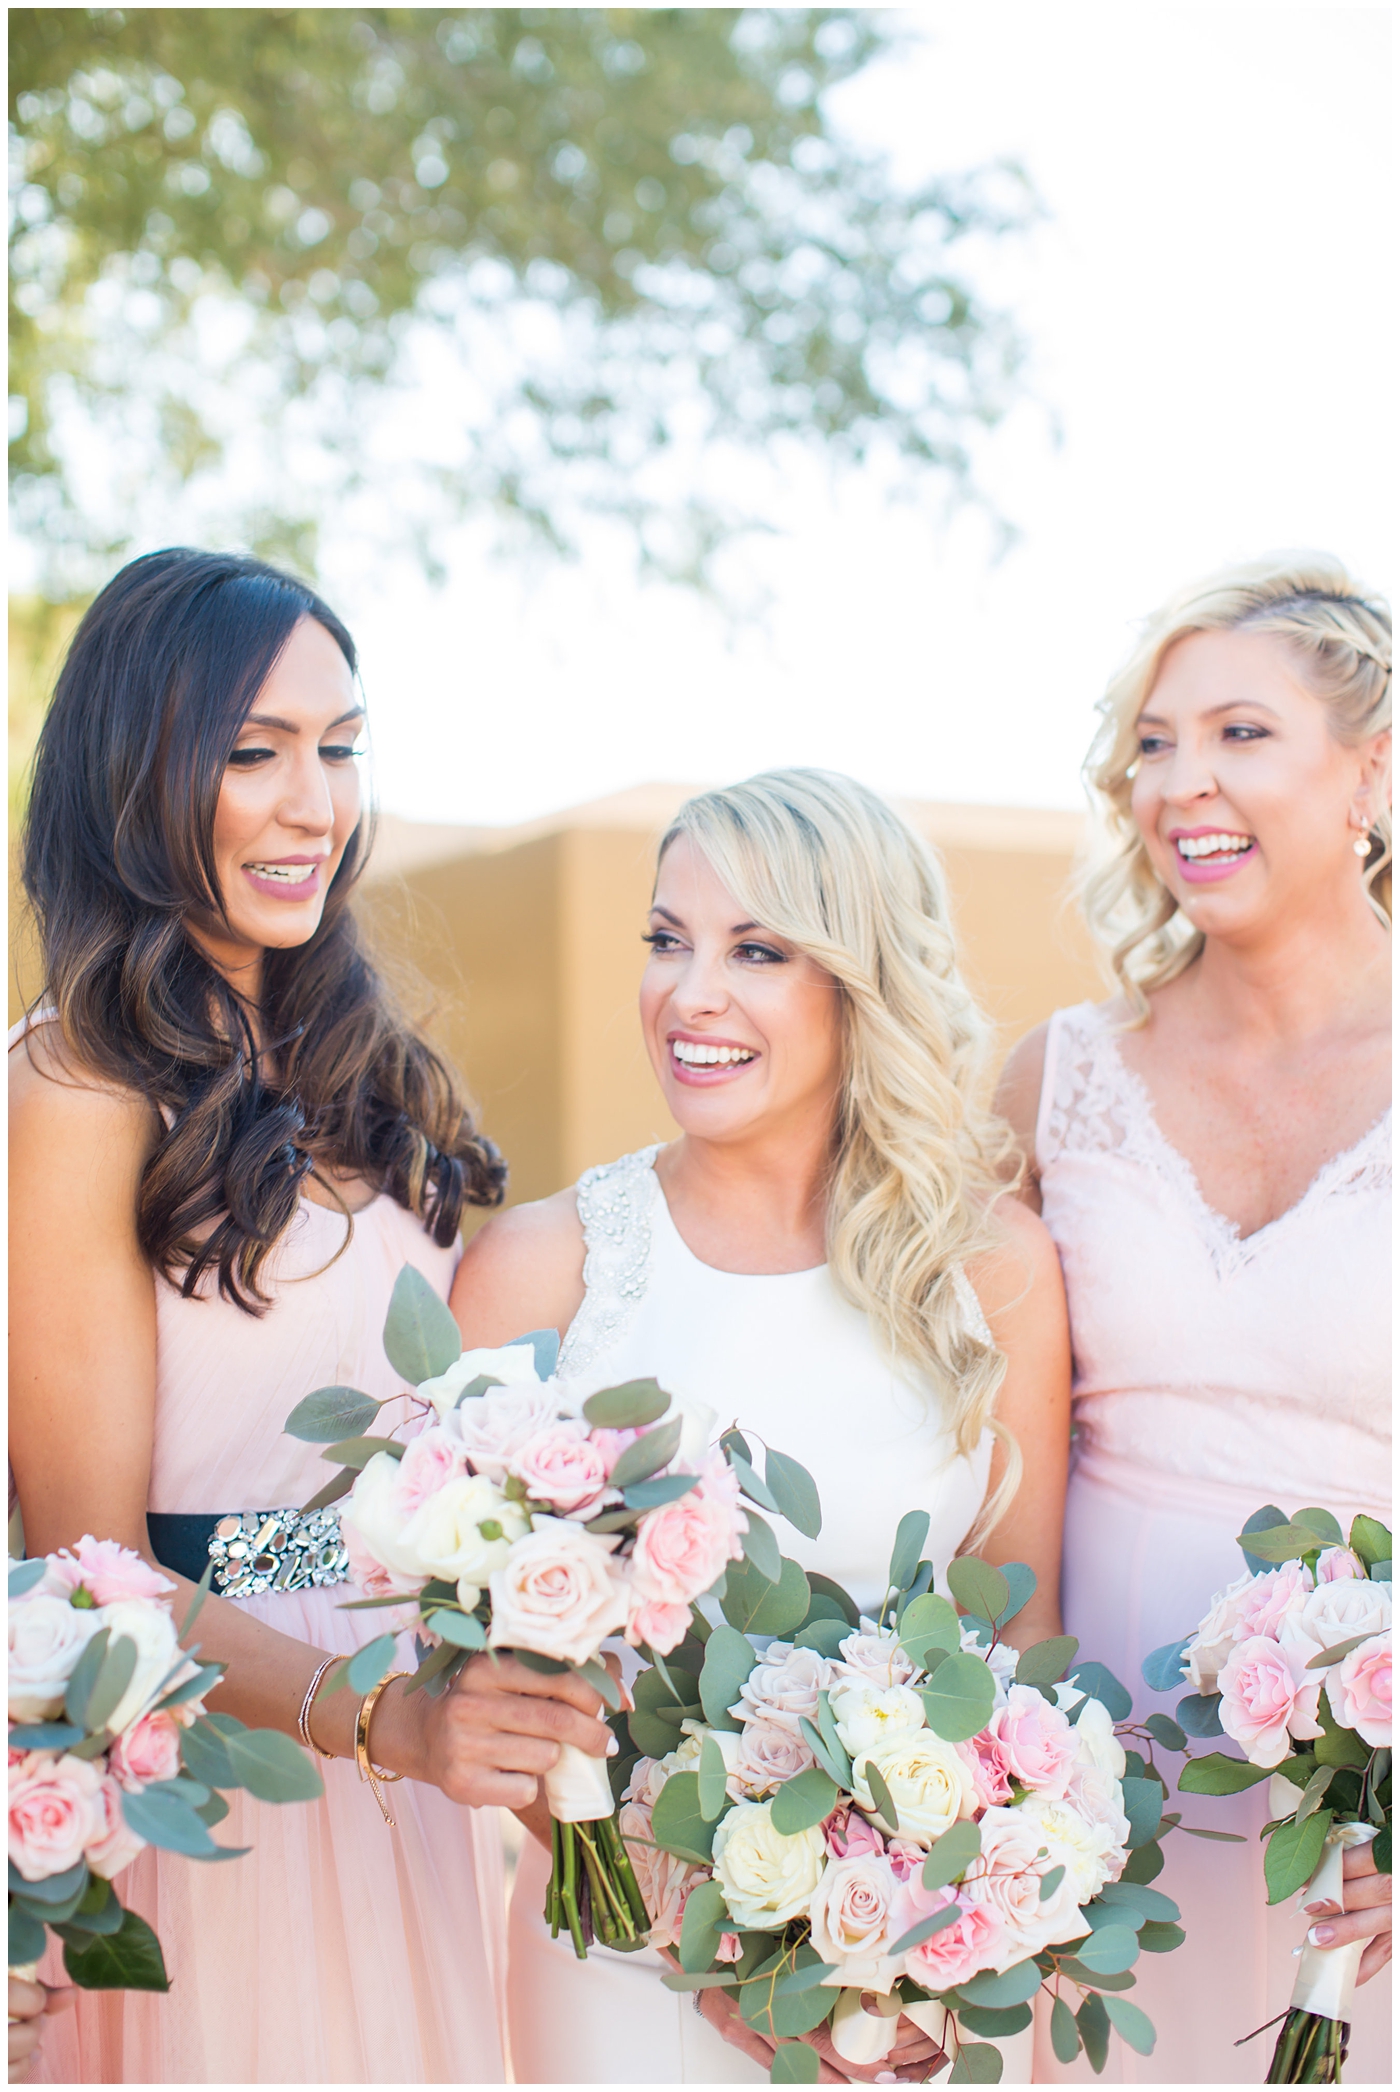 gorgeous bride with side swept hair in racerback pronovias dress and blush pink, white rose and eucalyptus greenery wedding bouquet with bridal party bridesmaids in blush pink dresses on wedding day